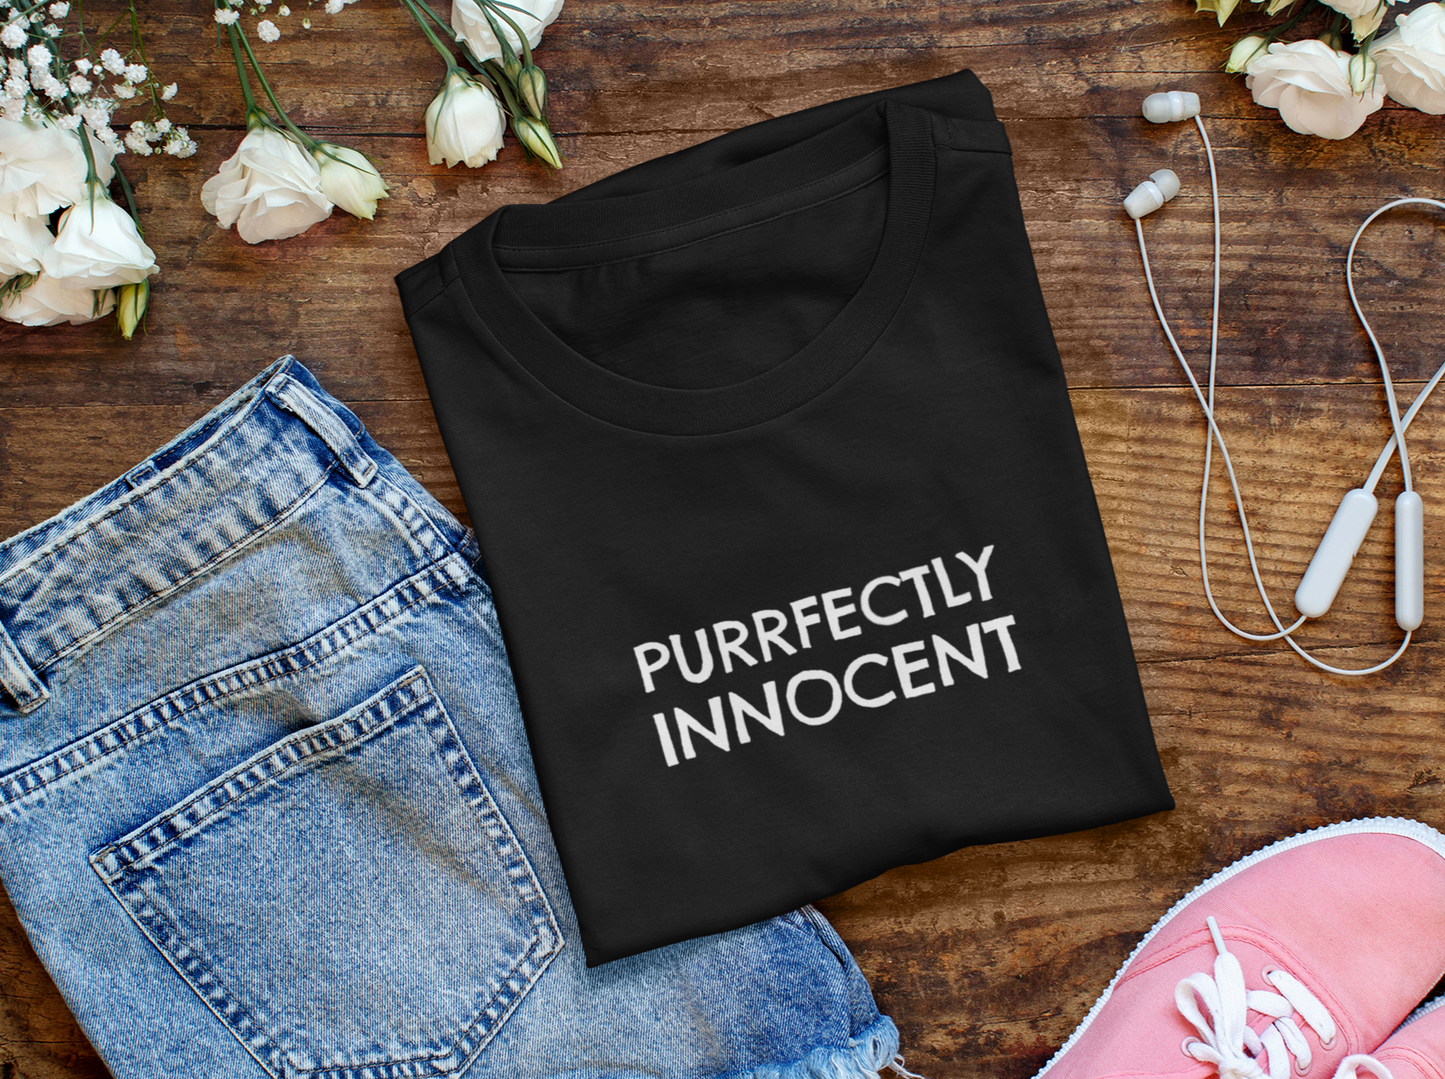 Purrfectly Innocent Printed Unisex T-Shirt